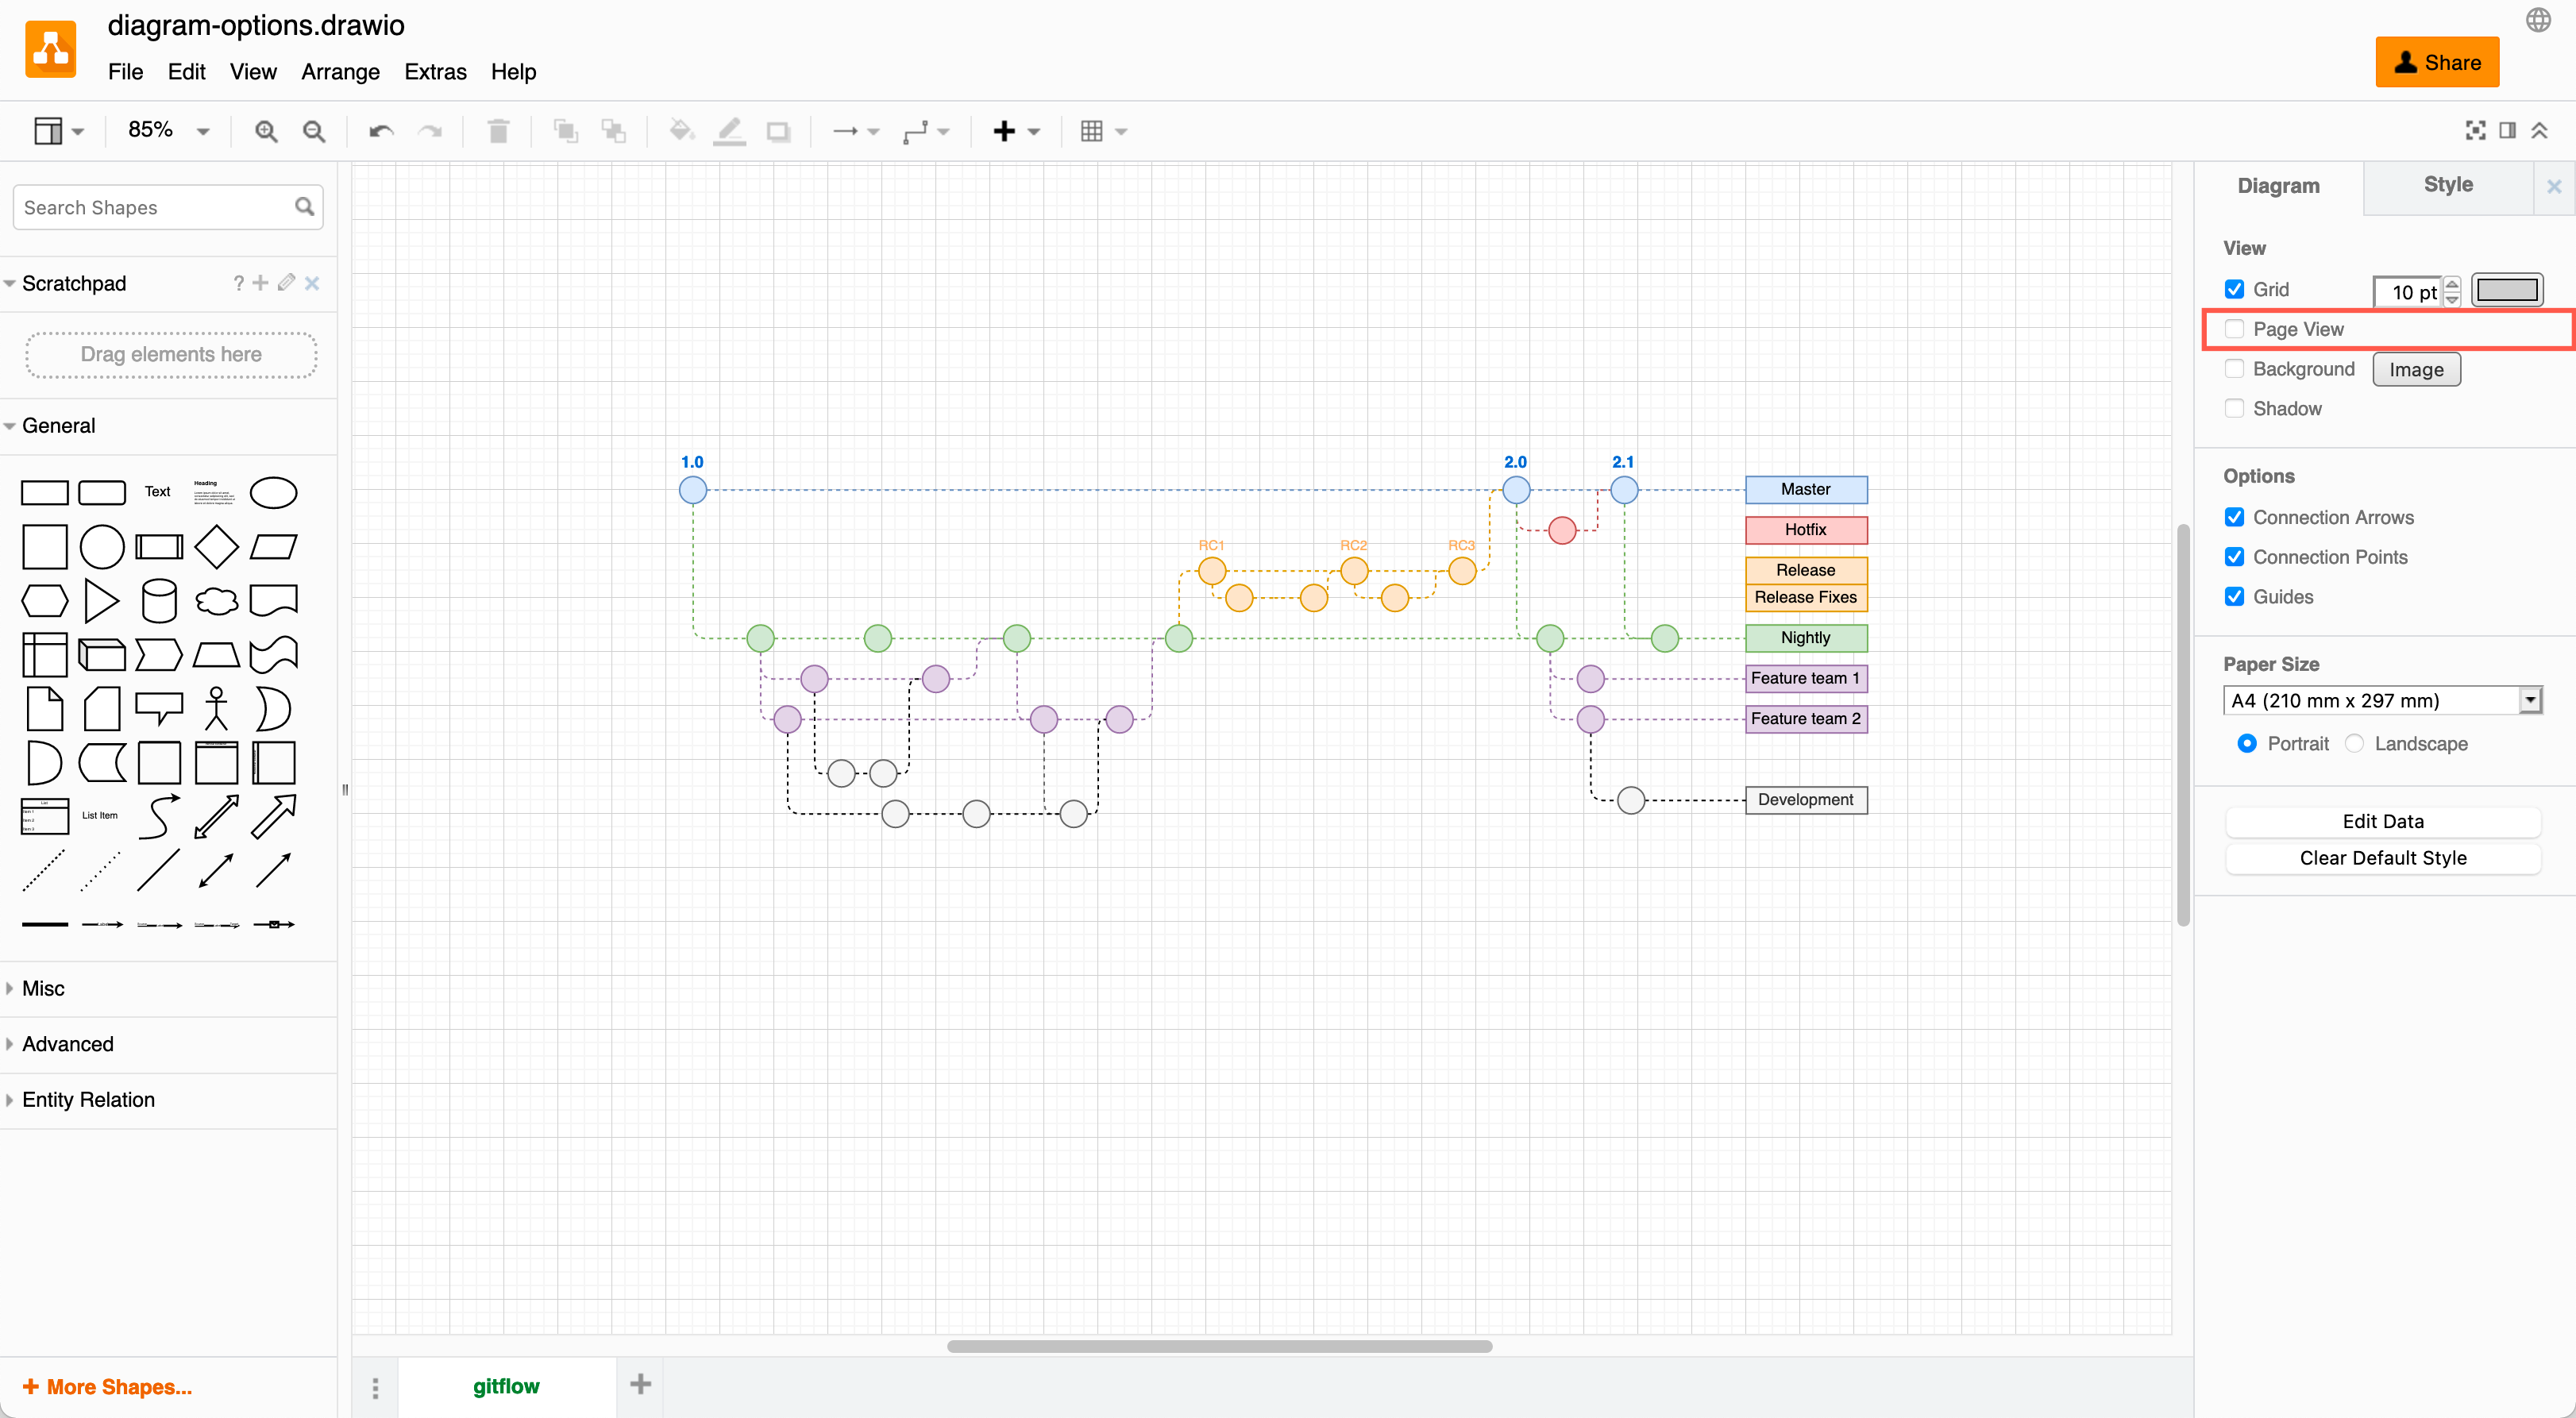 Change how the grid is displayed on the drawing canvas in draw.io